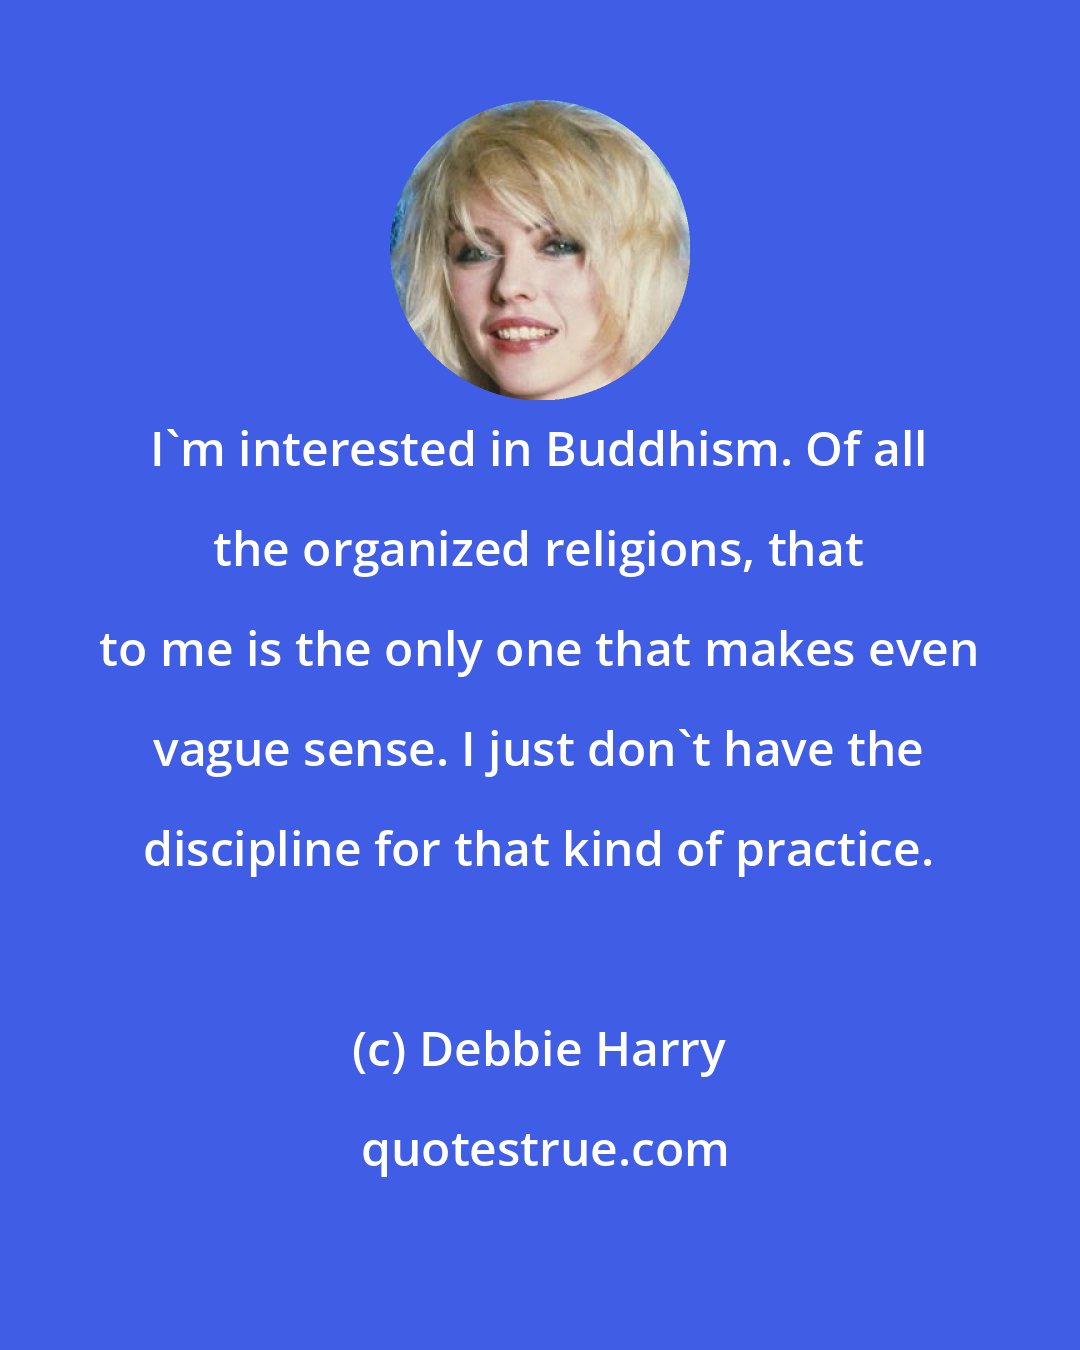 Debbie Harry: I'm interested in Buddhism. Of all the organized religions, that to me is the only one that makes even vague sense. I just don't have the discipline for that kind of practice.